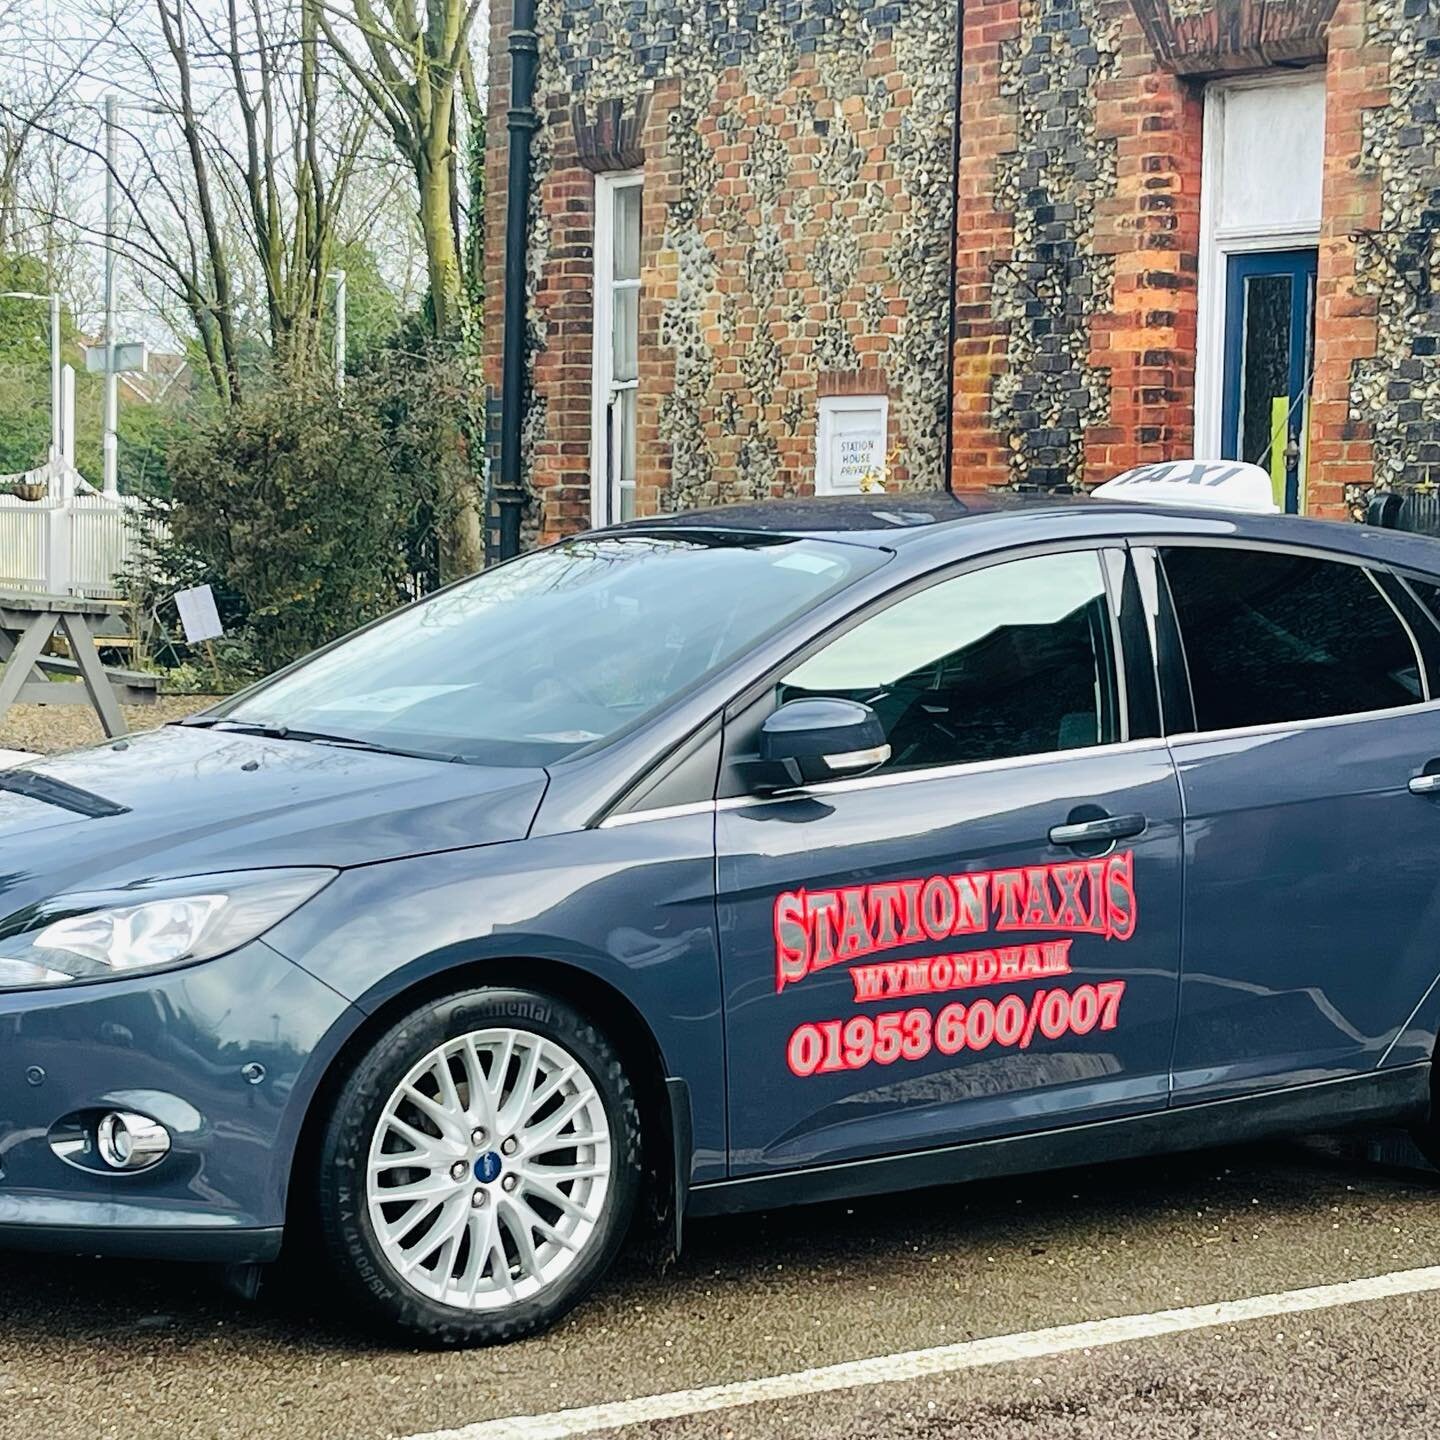 One of our vehicles all clean again and ready for pick up. #covid_19 #safetyfirst #ppe #taxi #wymondhamnorfolk